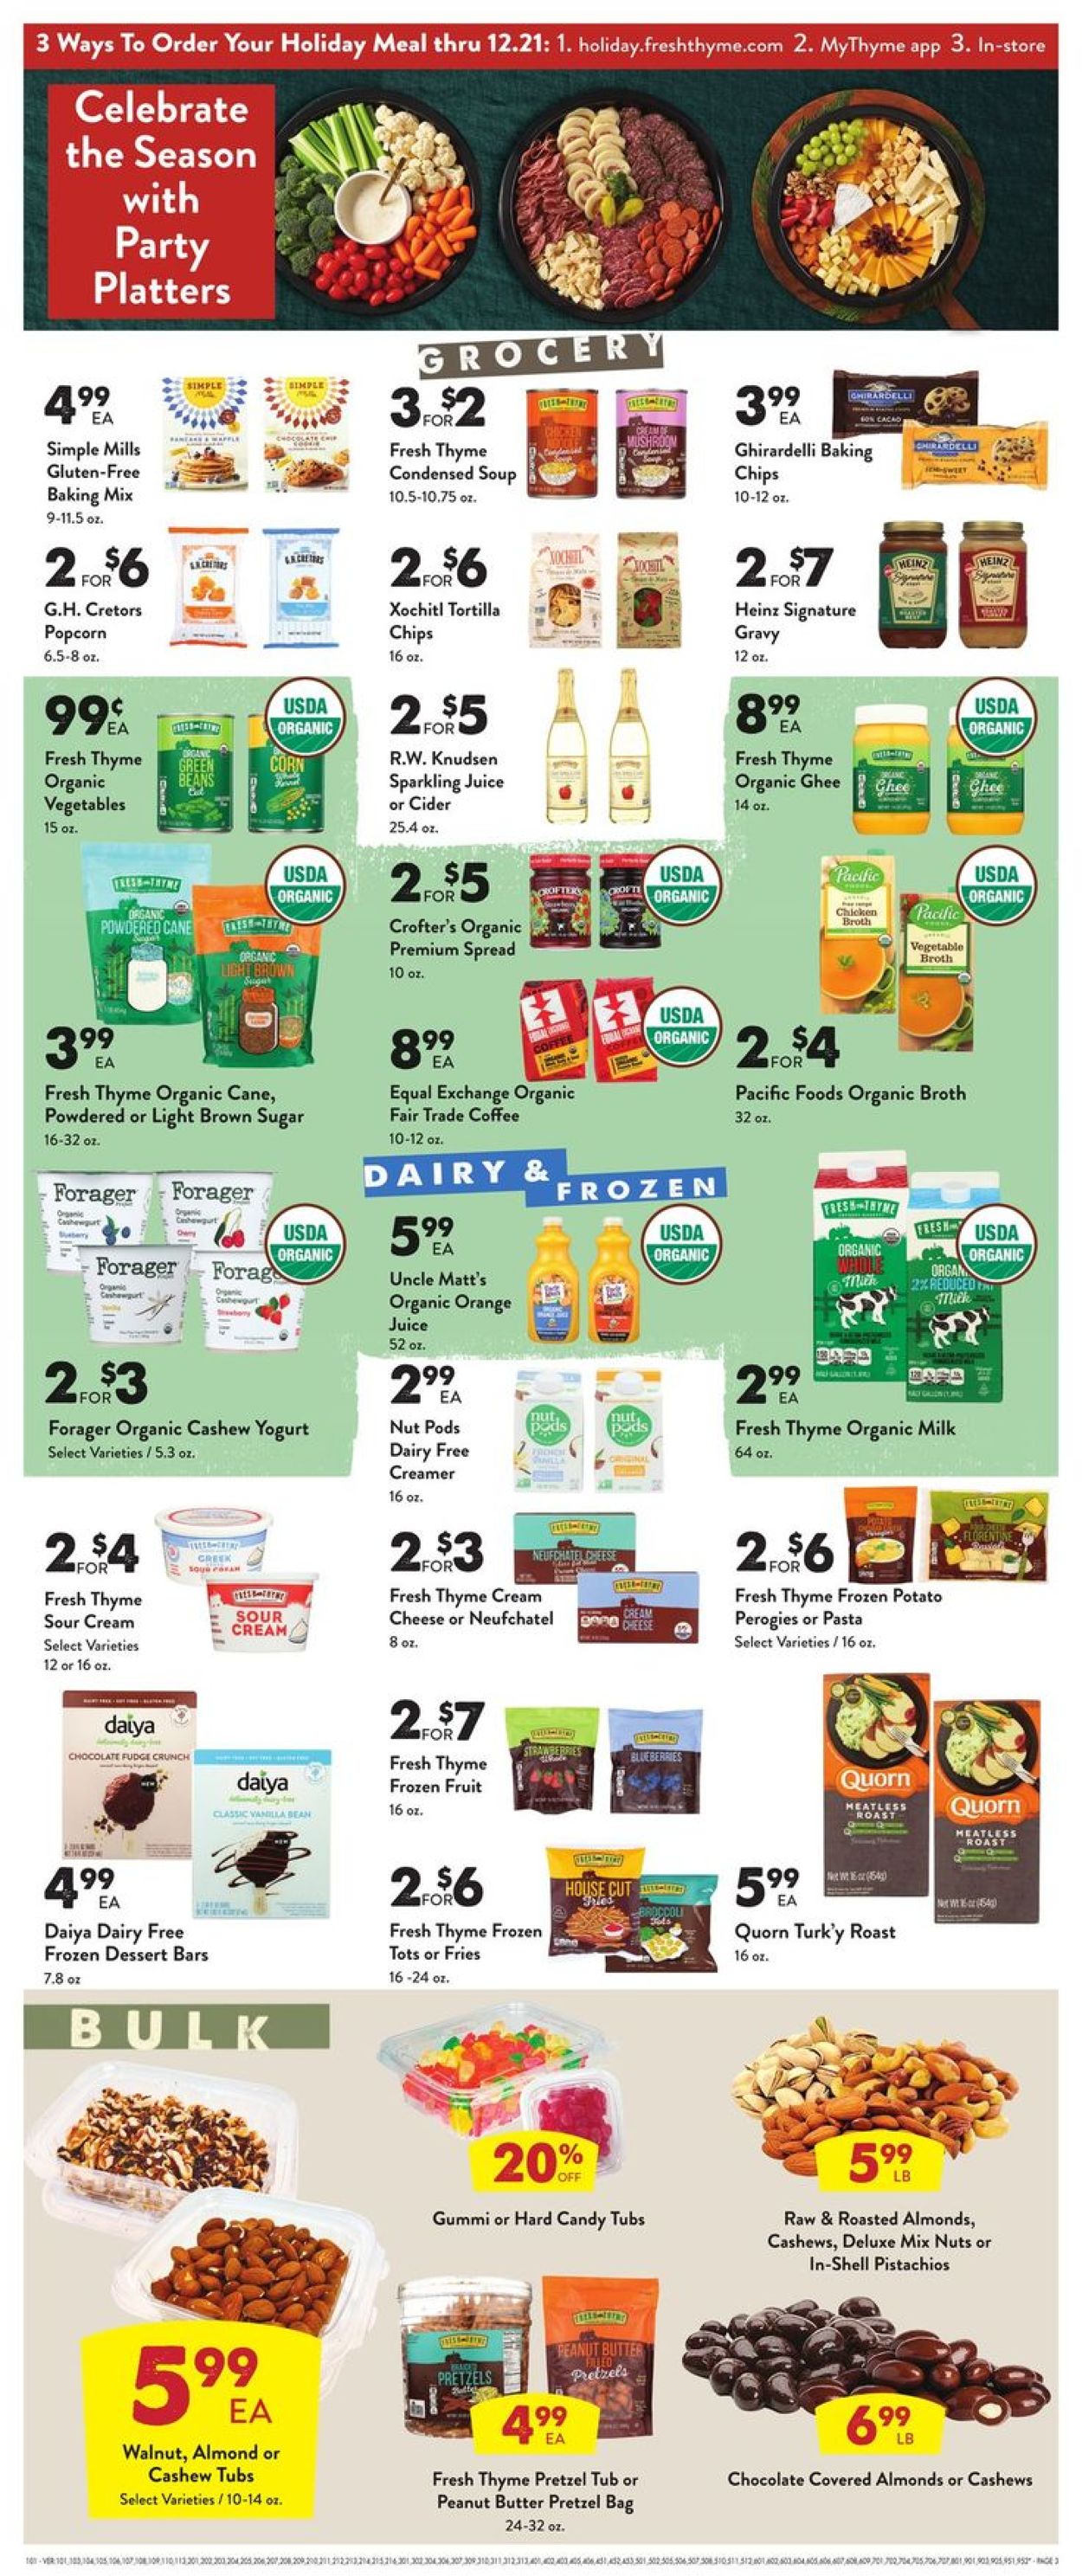 Catalogue Fresh Thyme - Holidays Ad 2019 from 12/18/2019